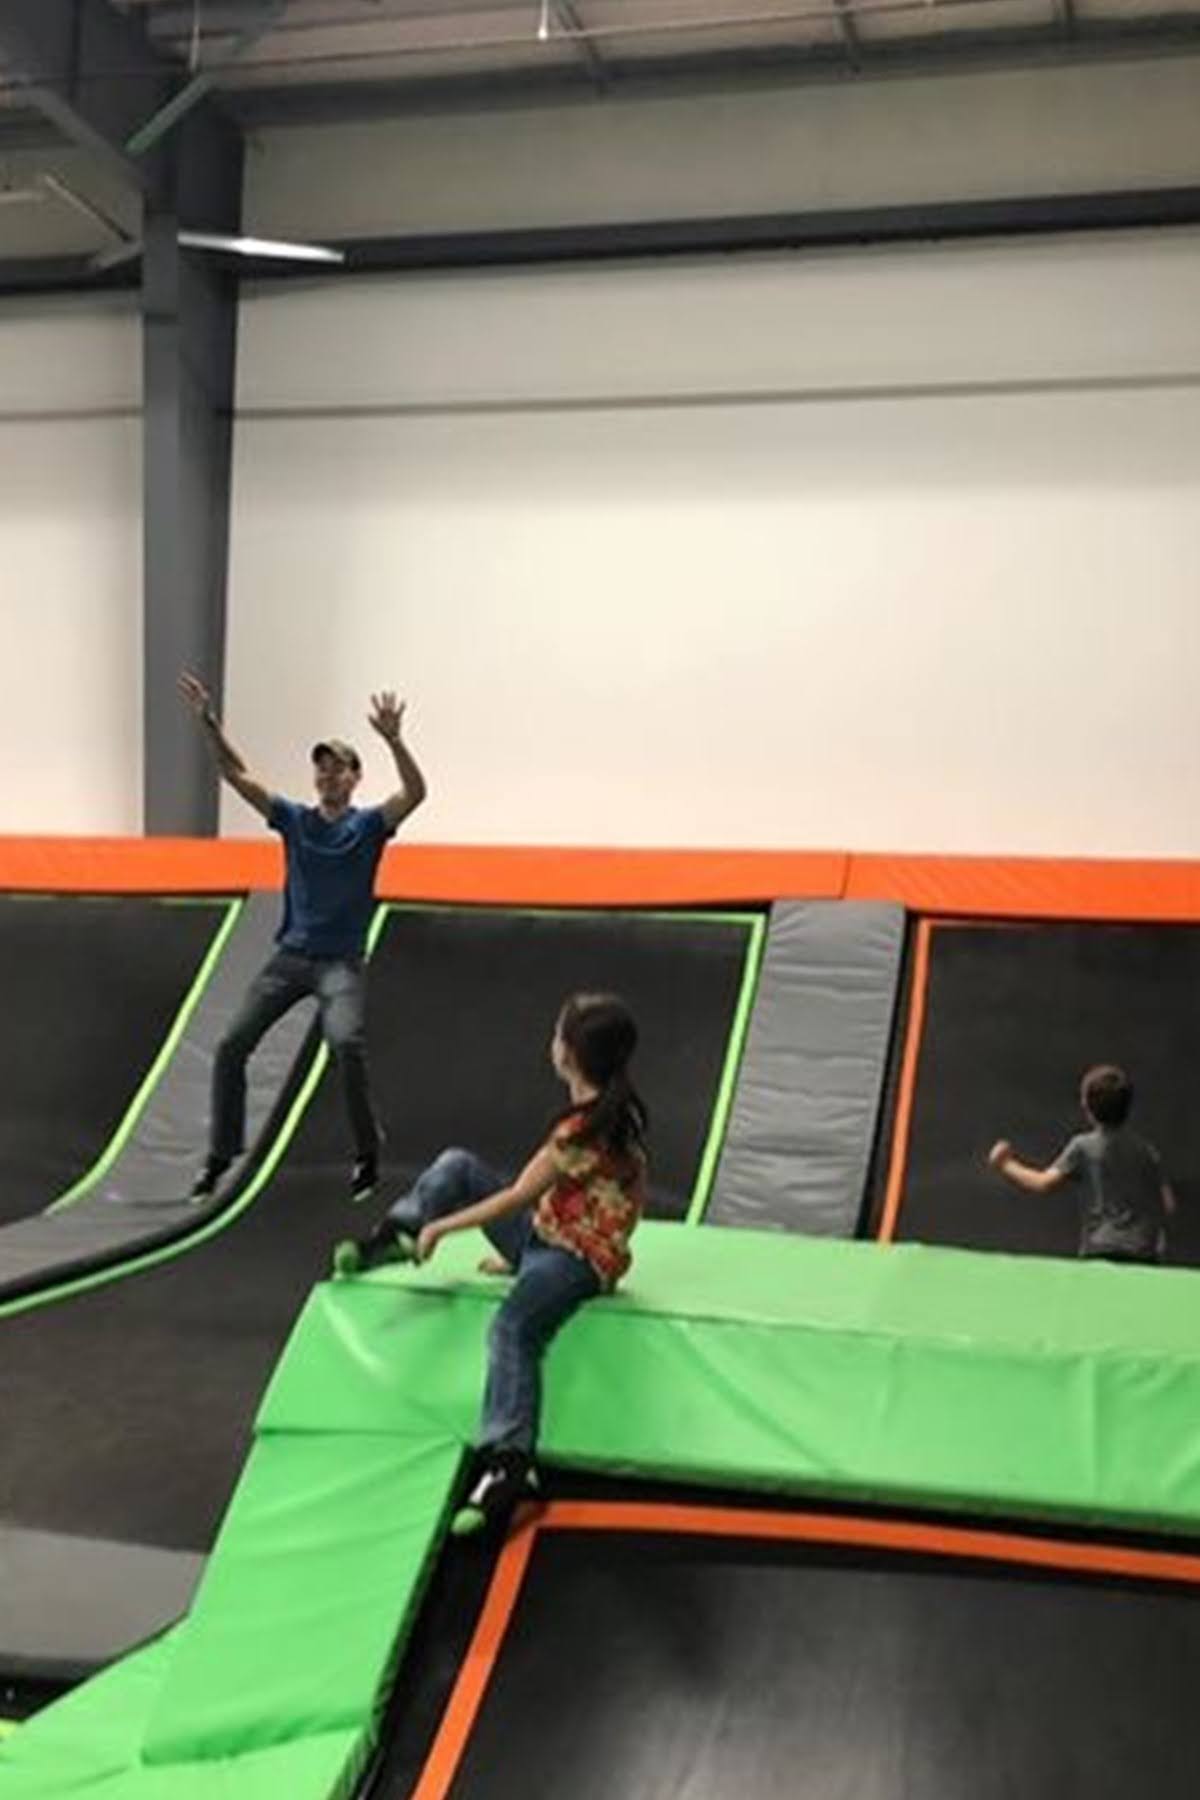 Kids jumping on trampolines